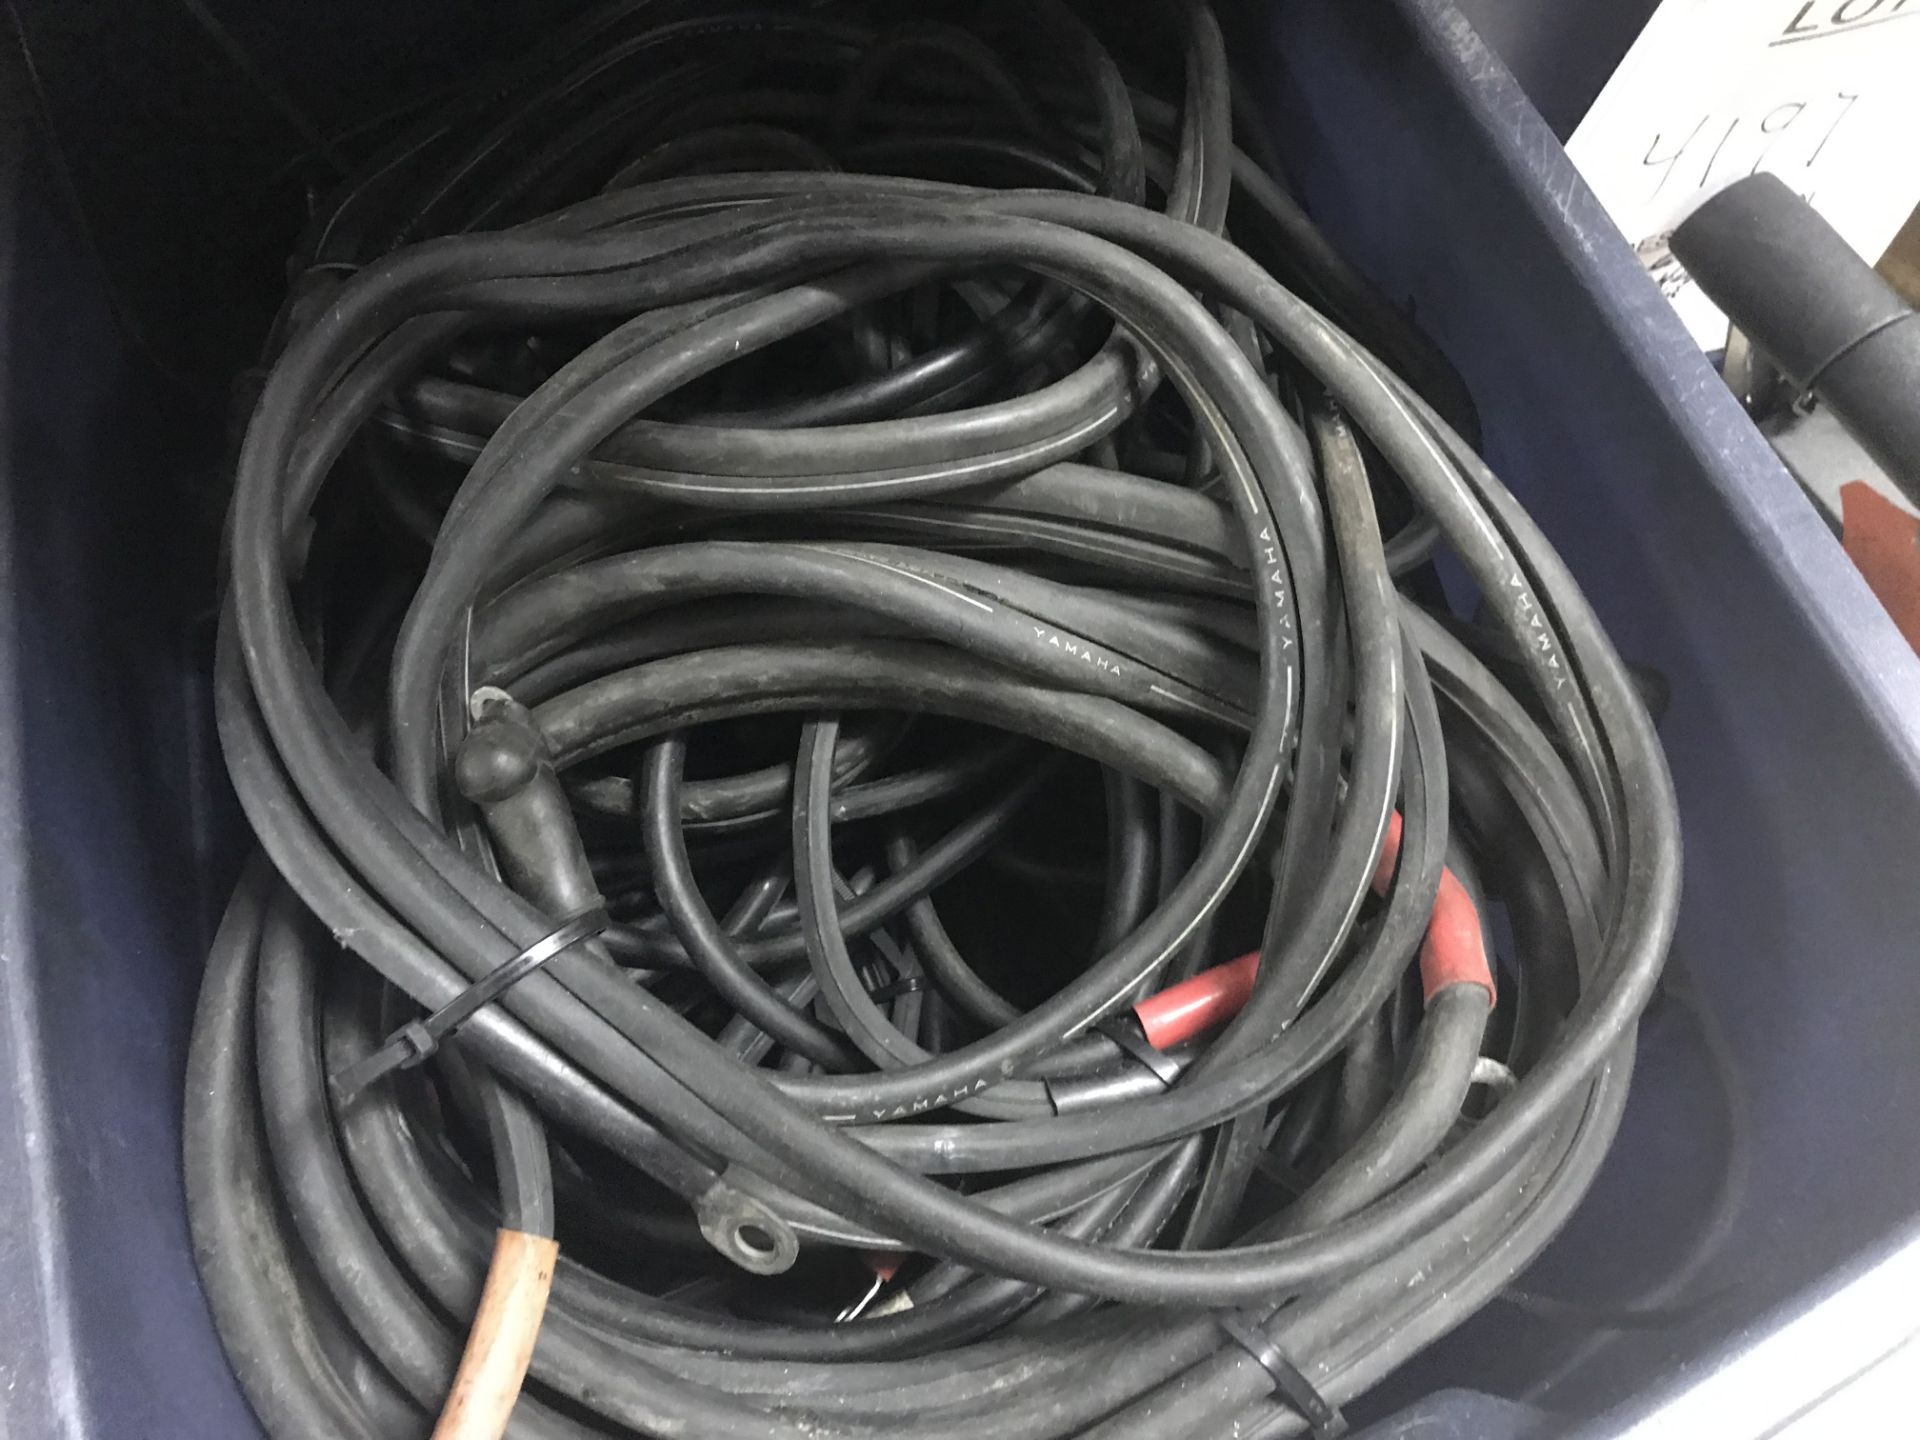 ASSORTED YAMAHA BATTERY CABLES / HARNESSES - Image 2 of 2